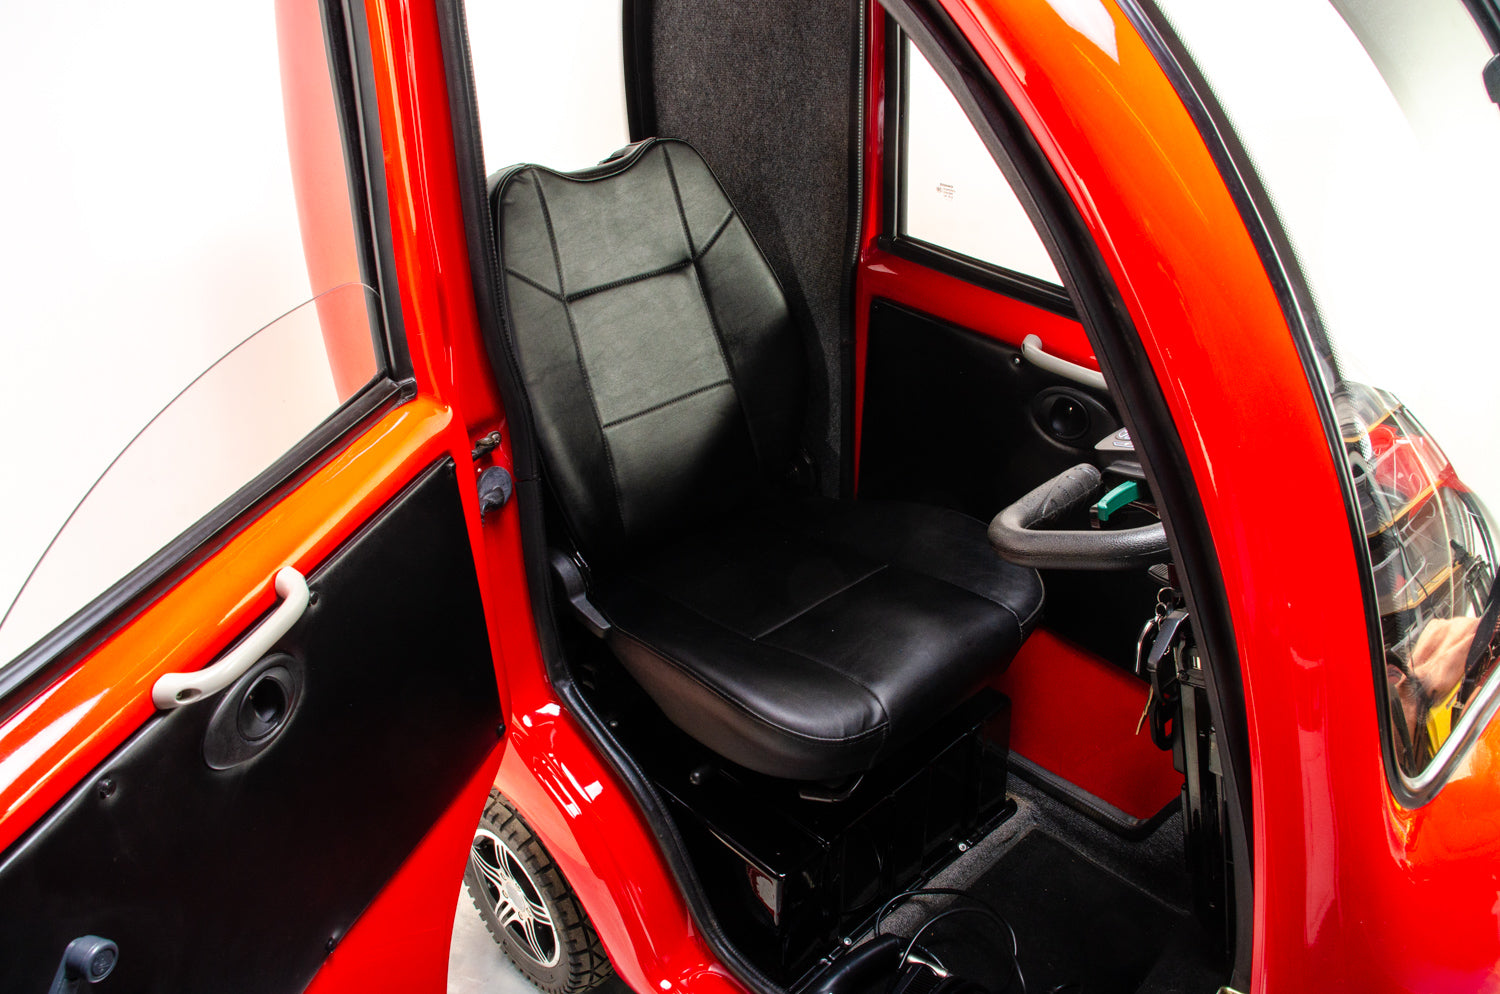 Scooterpac CabinCar MK2 8mph Used Mobility Scooter Enclosed Cabin Car Electric Road Legal Red